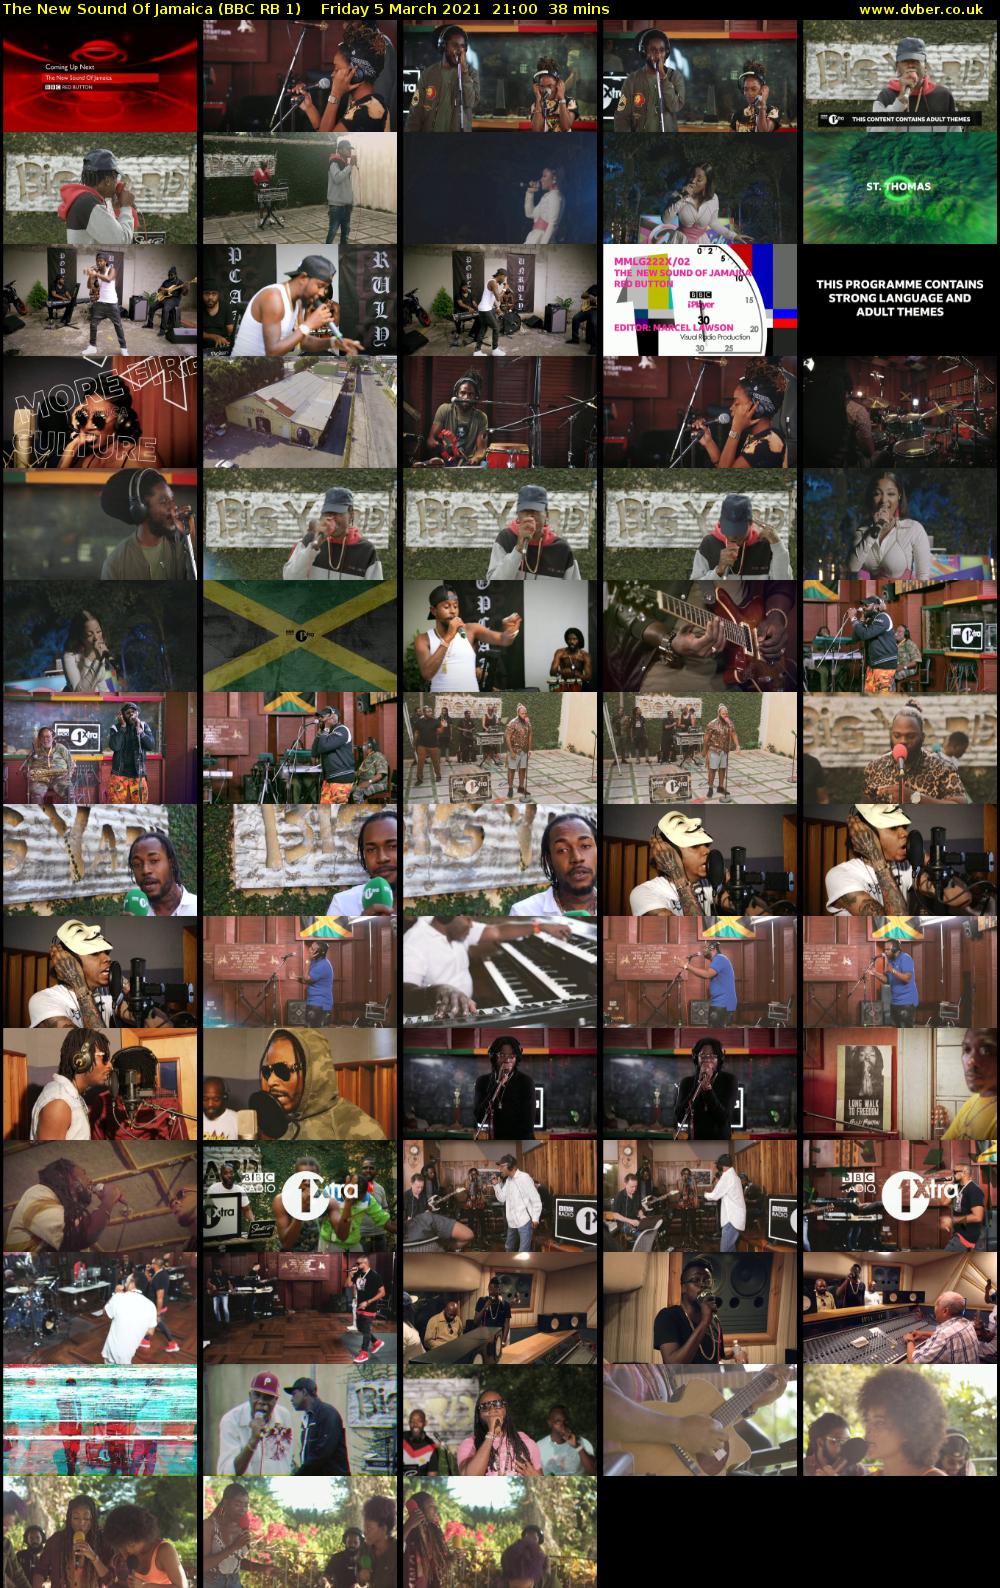 The New Sound of Jamaica (BBC RB 1) Friday 5 March 2021 21:00 - 21:38